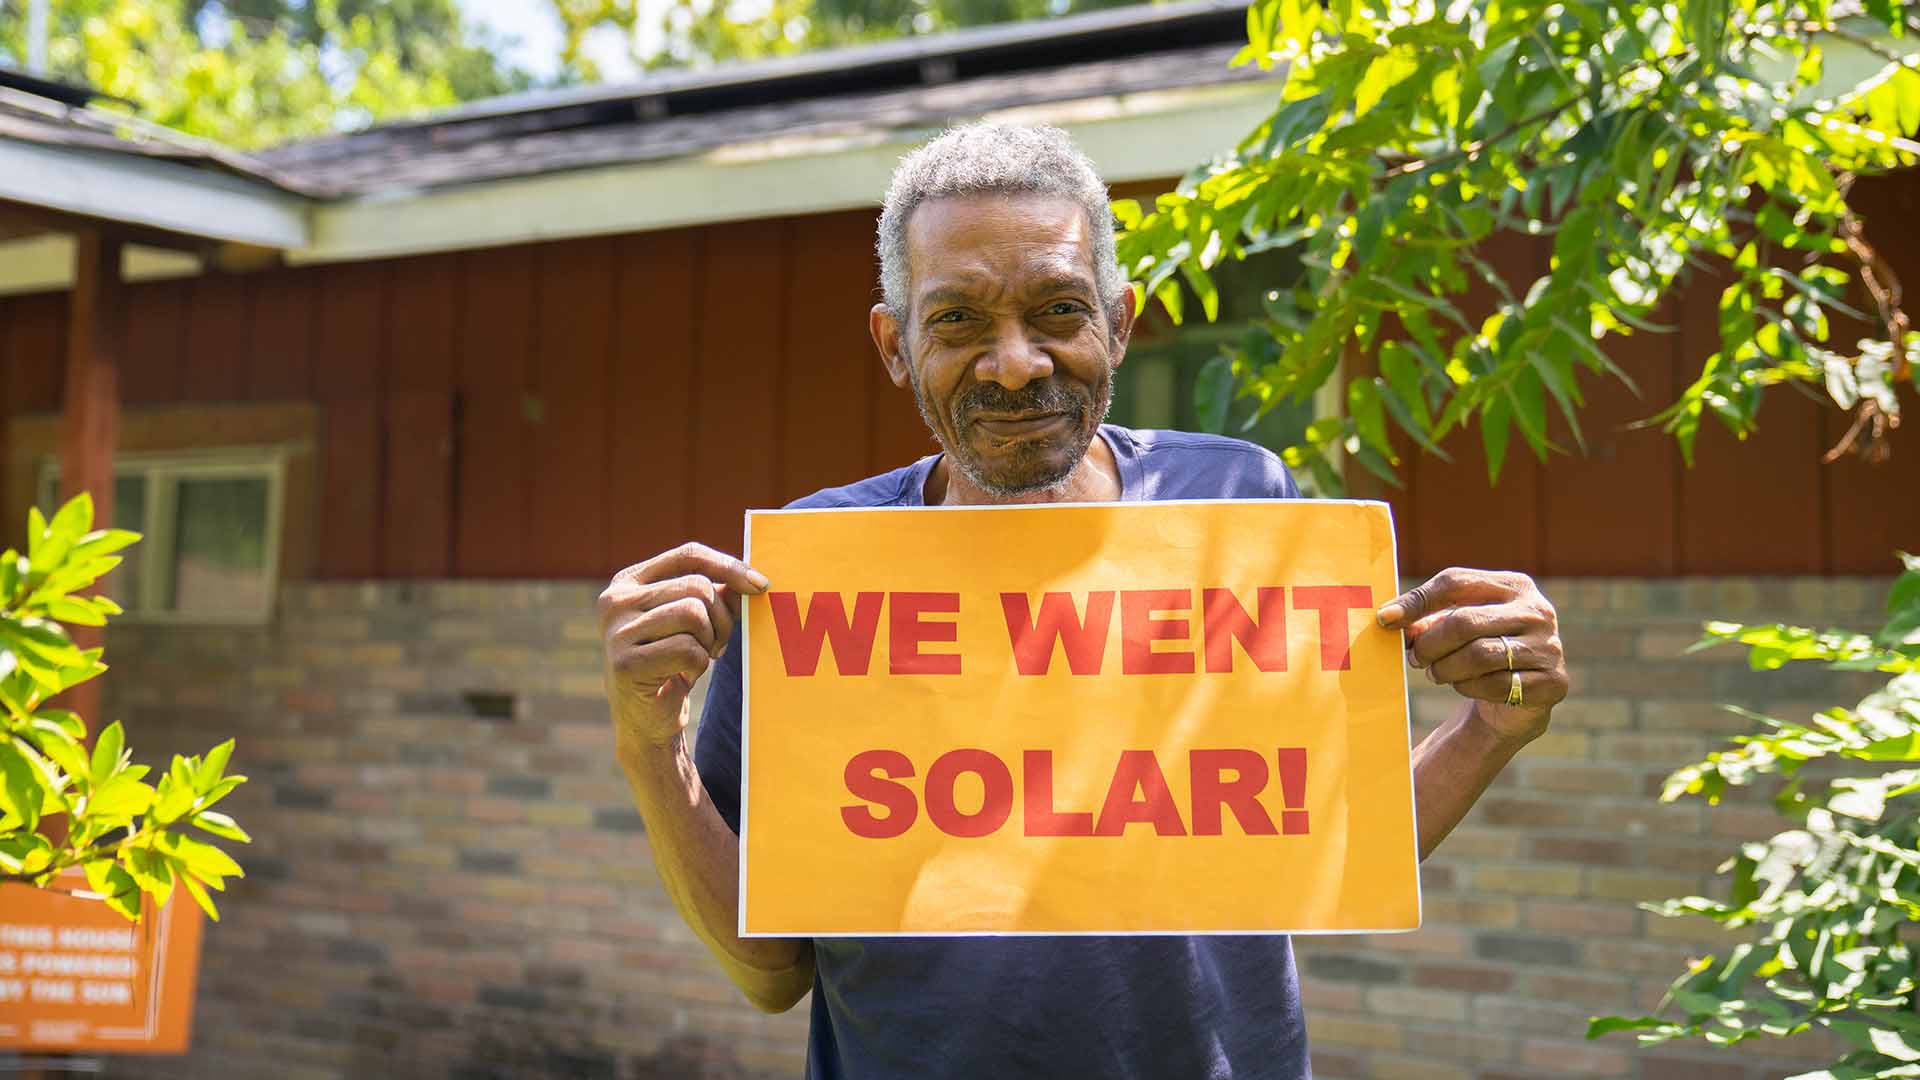 Man holding sign that reads "We went solar!"